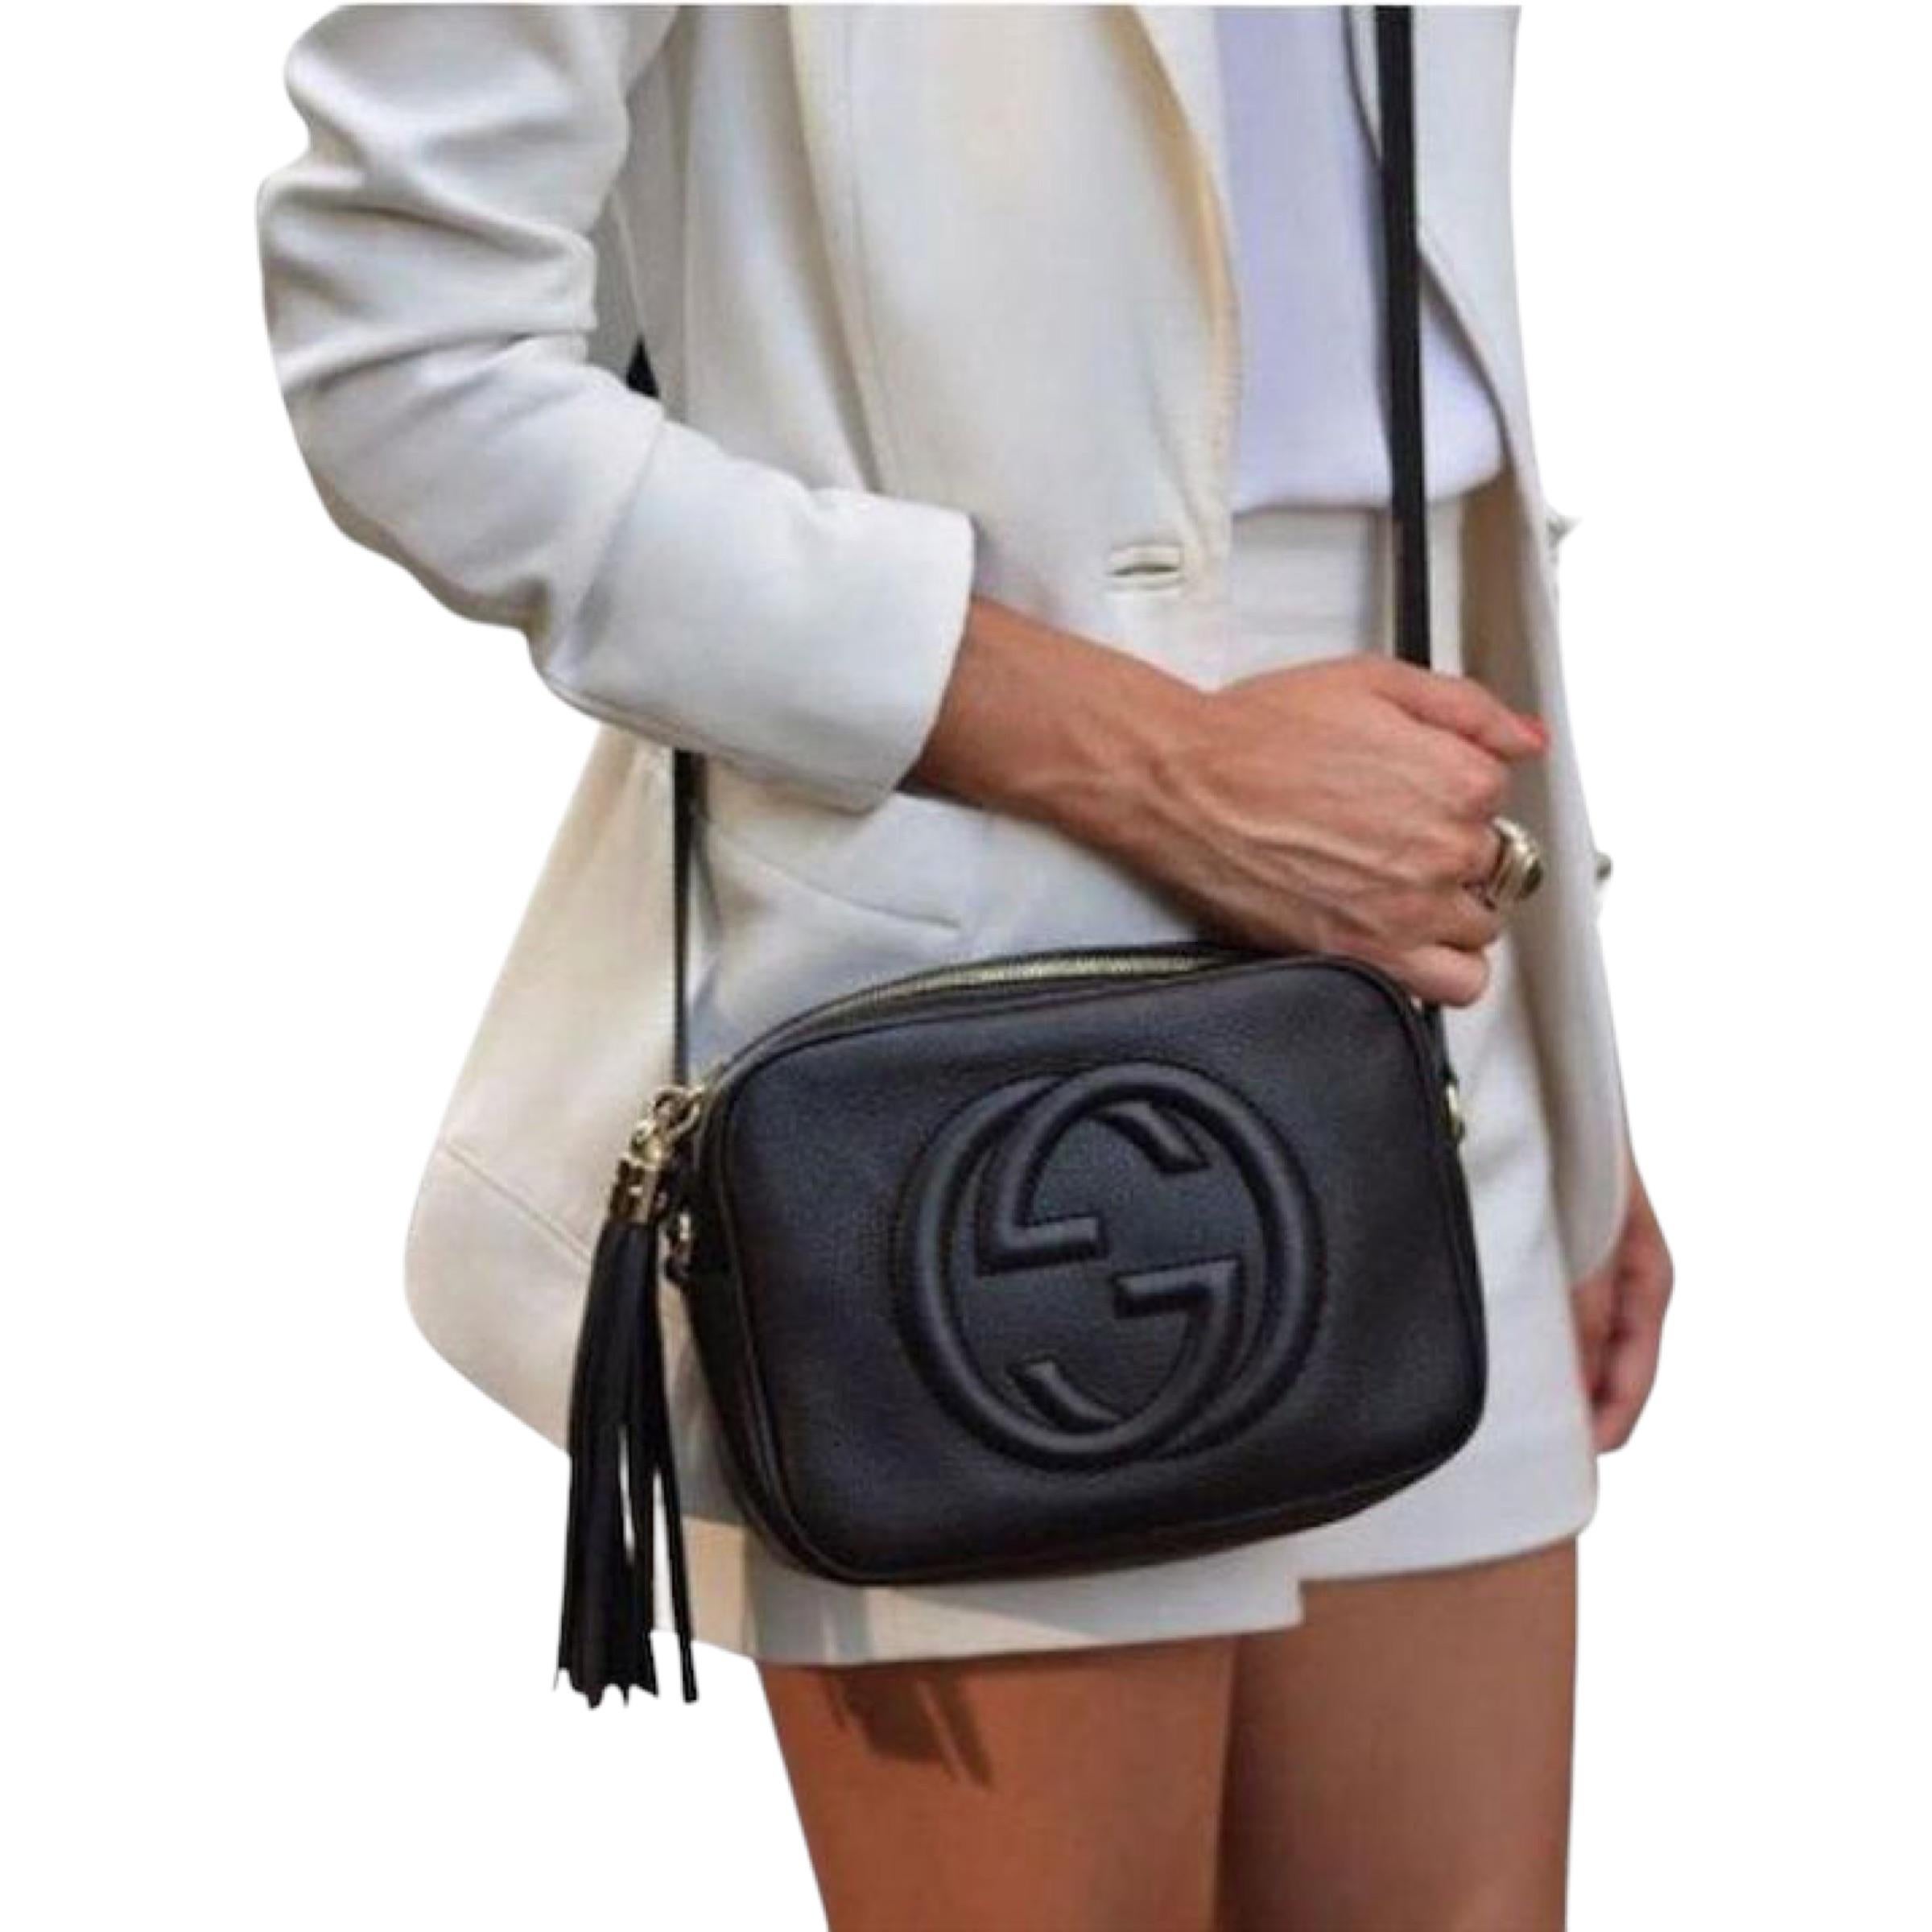 NEW Gucci Black Small Soho Disco Leather Crossbody Bag For Sale 11